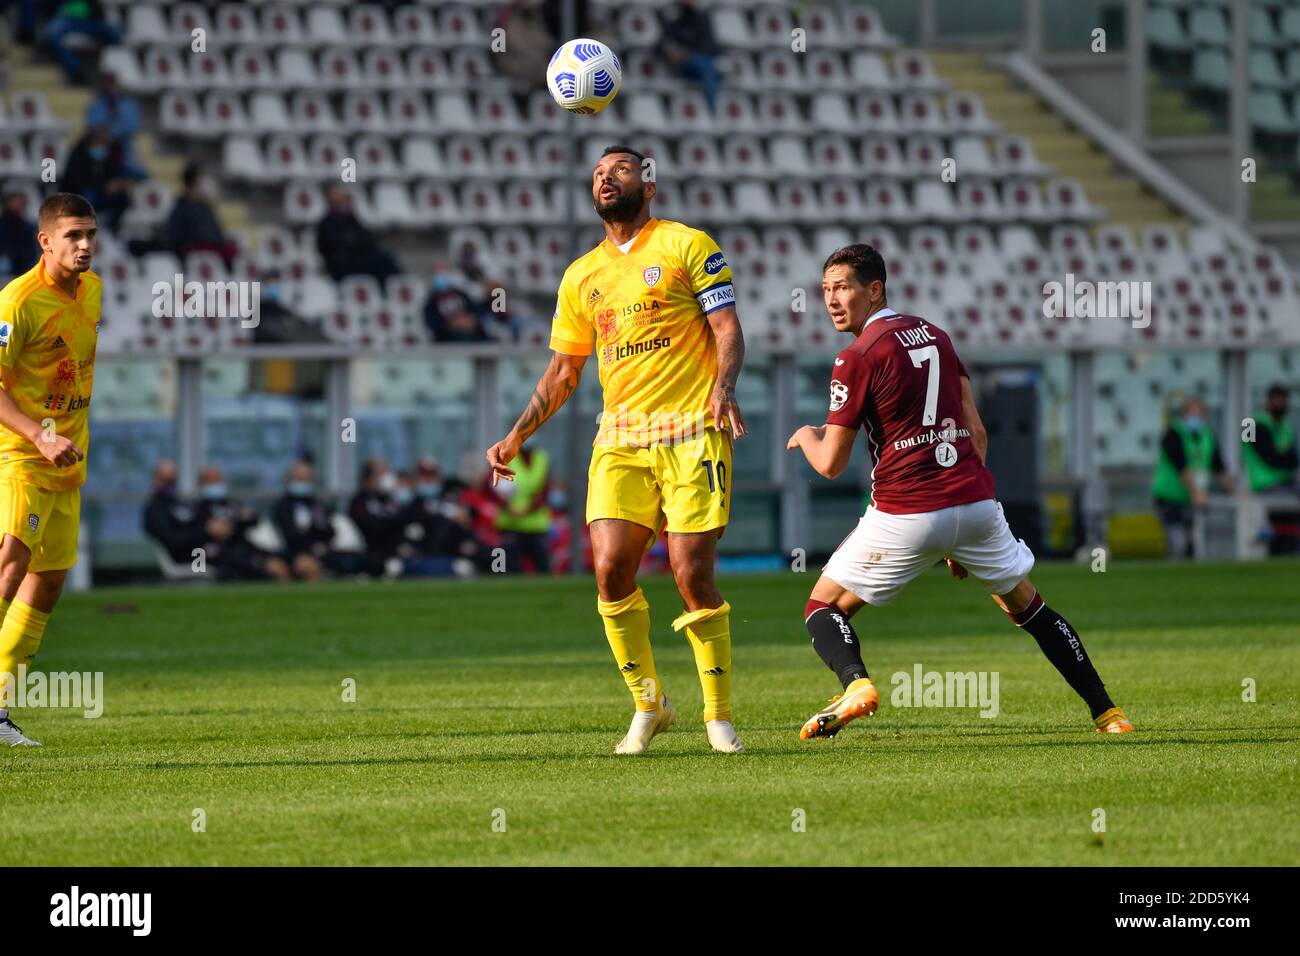 Torino, Italy. 18th, October 2020. Joao Pedro (10) of Cagliari and Sasa Lukic (7) of Torino seen in the Serie A match between Torino and Cagliari at Stadio Olimpico in Torino. (Photo credit: Gonzales Photo - Tommaso Fimiano). Stock Photo